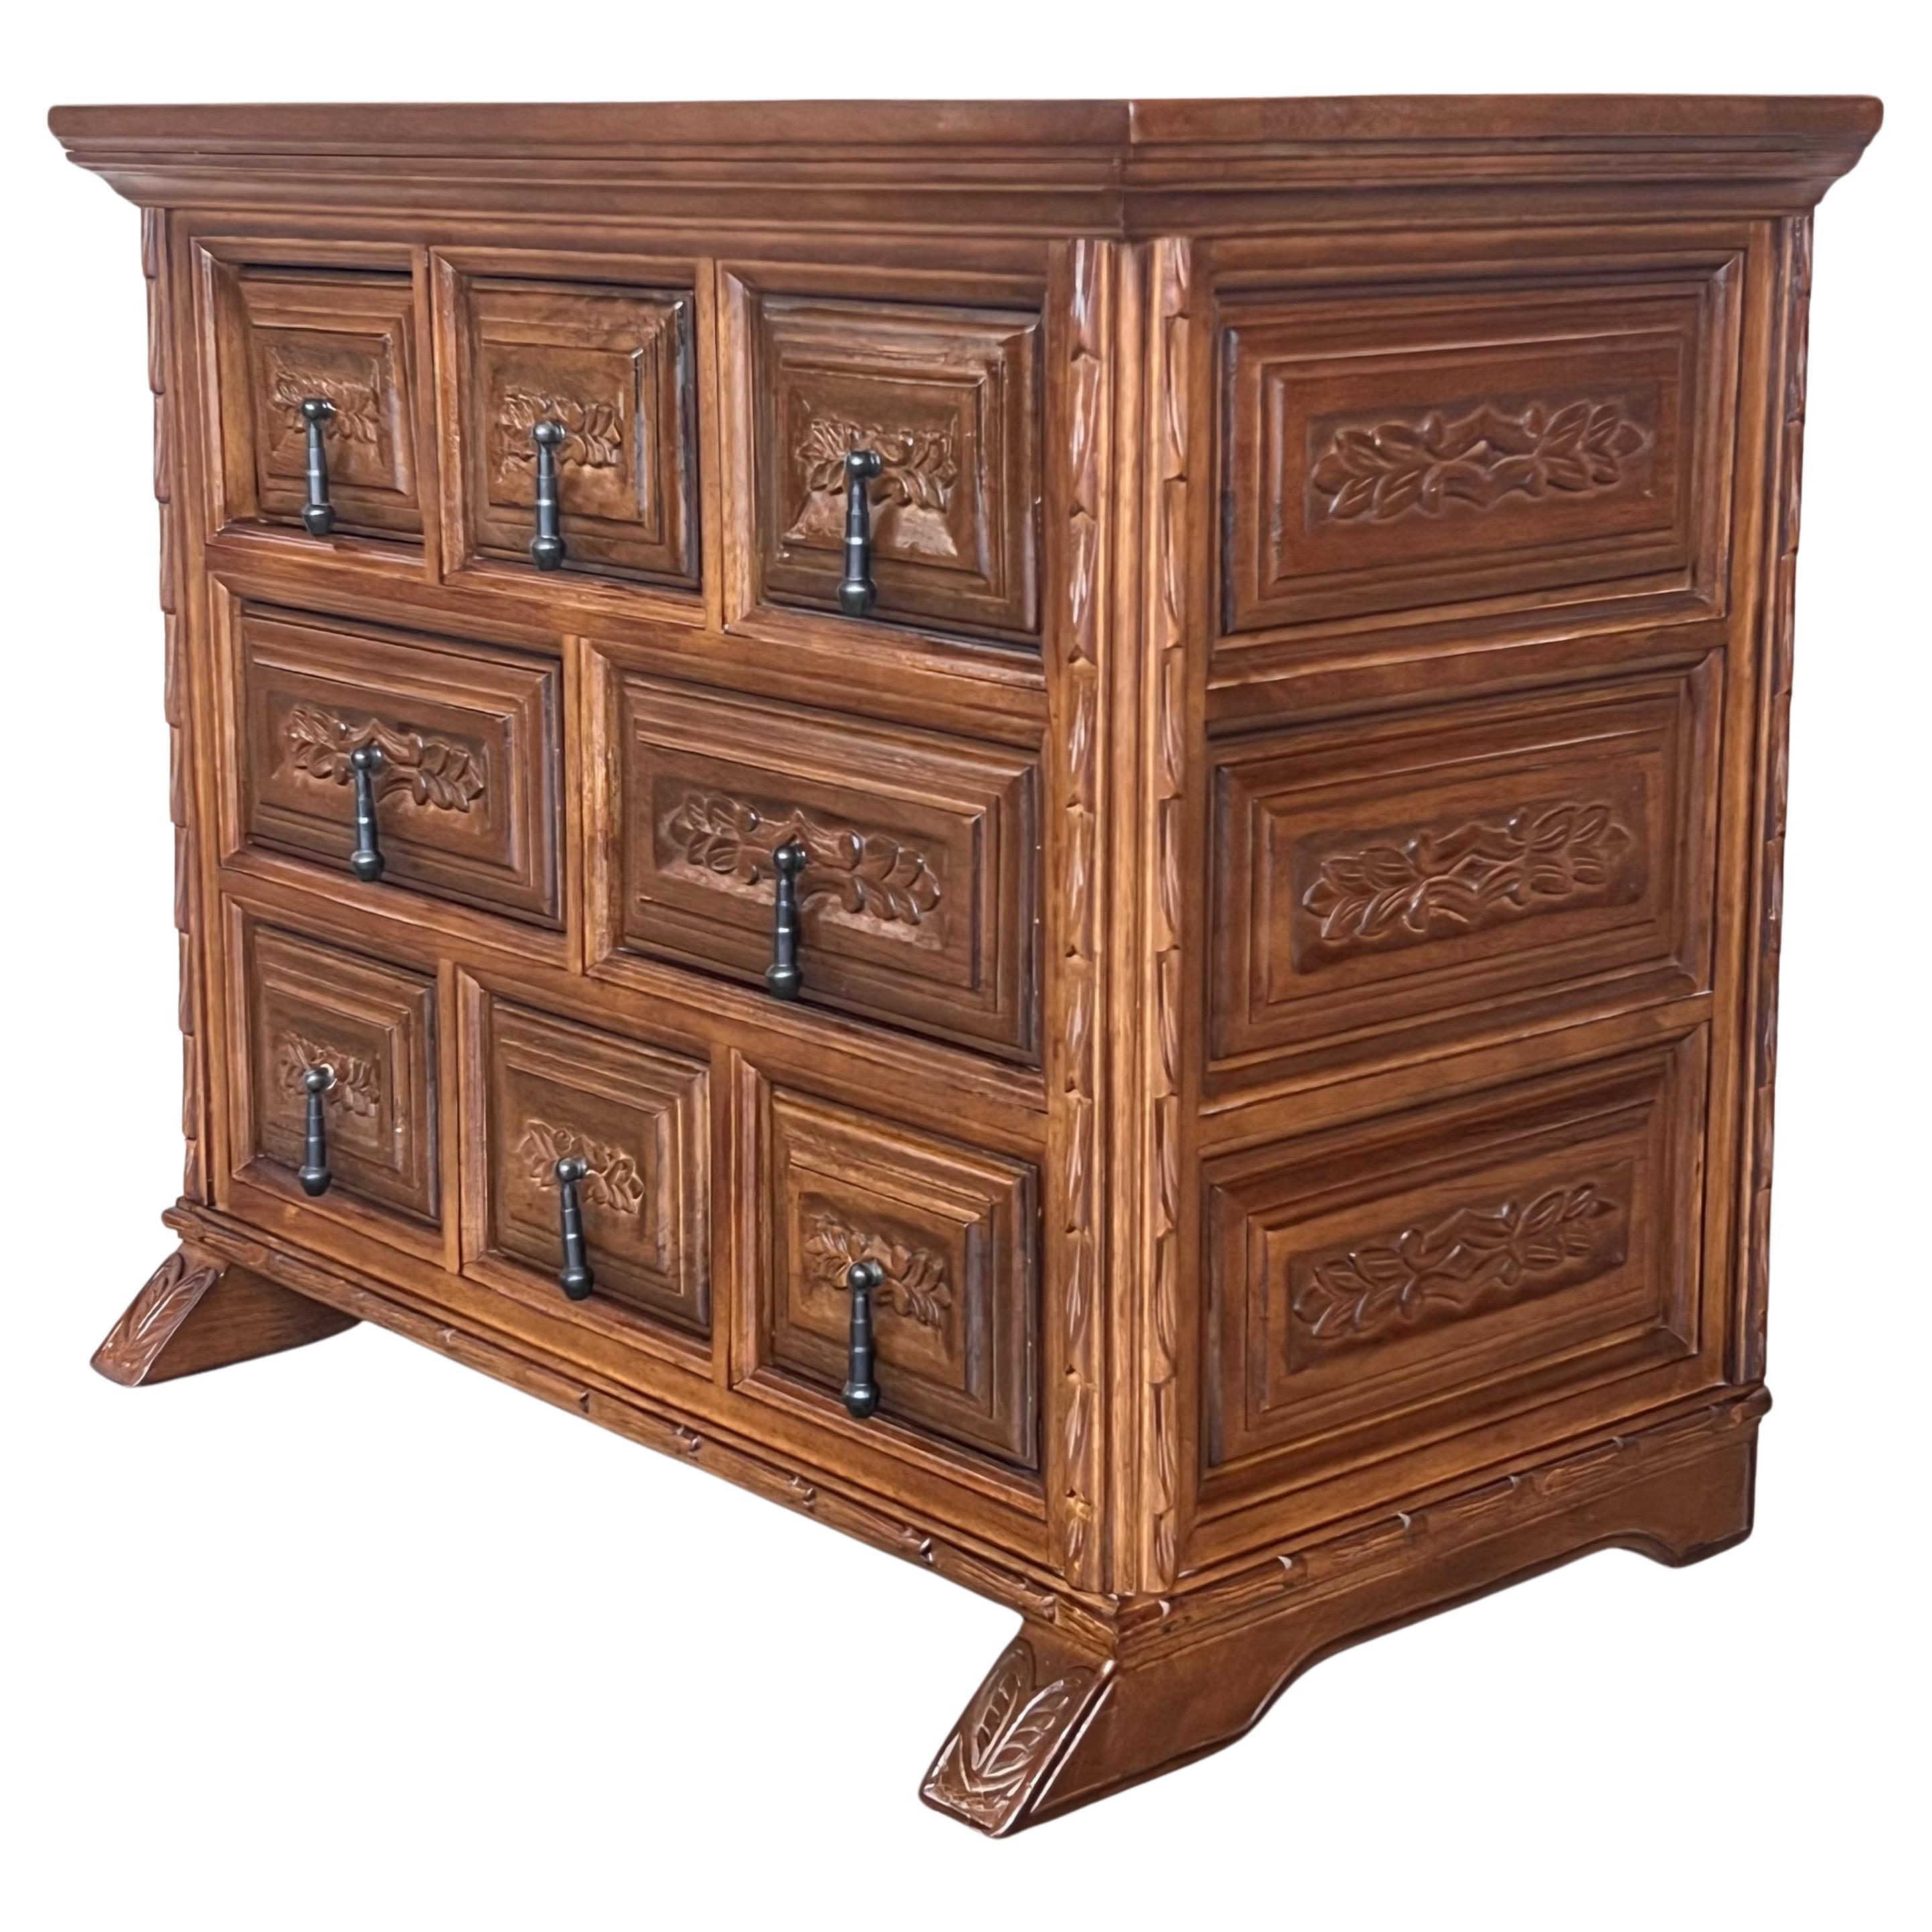 20th Catalan Spanish Baroque Carved Walnut Tuscan Chest of Drawers or Nightstand